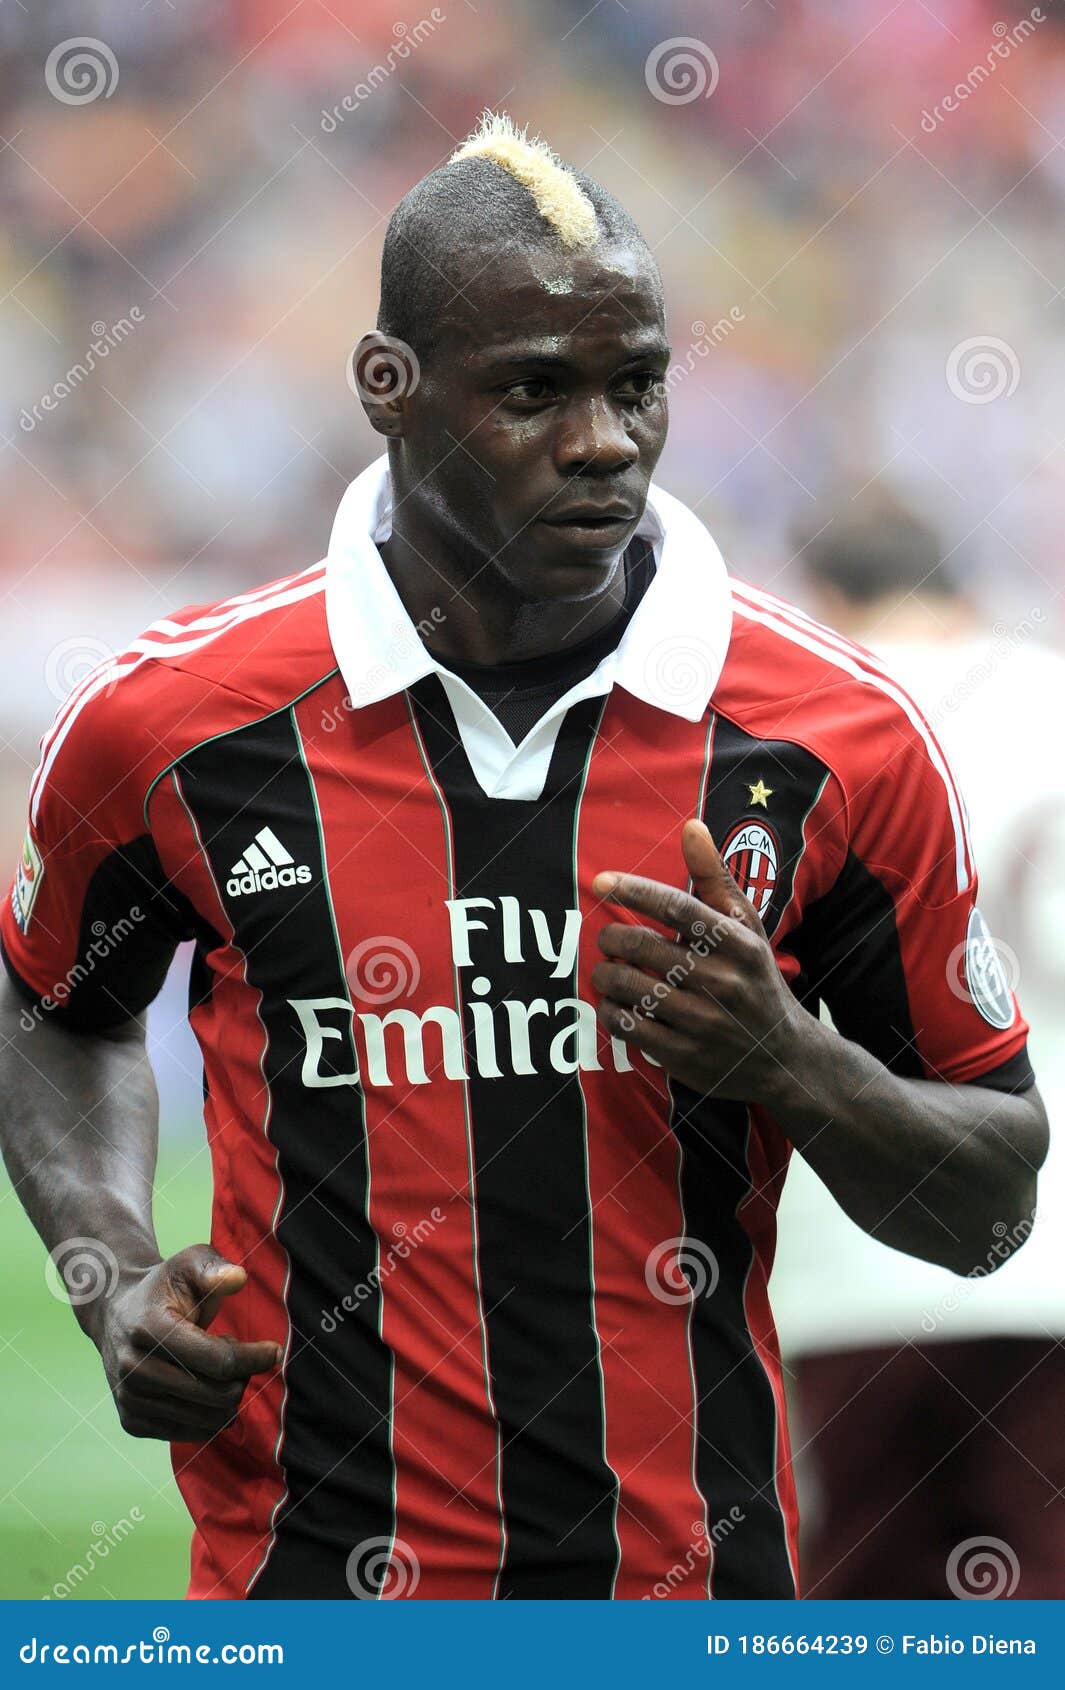 Mario Balotelli during the Editorial Stock Image Image of sport, professional: 186664239